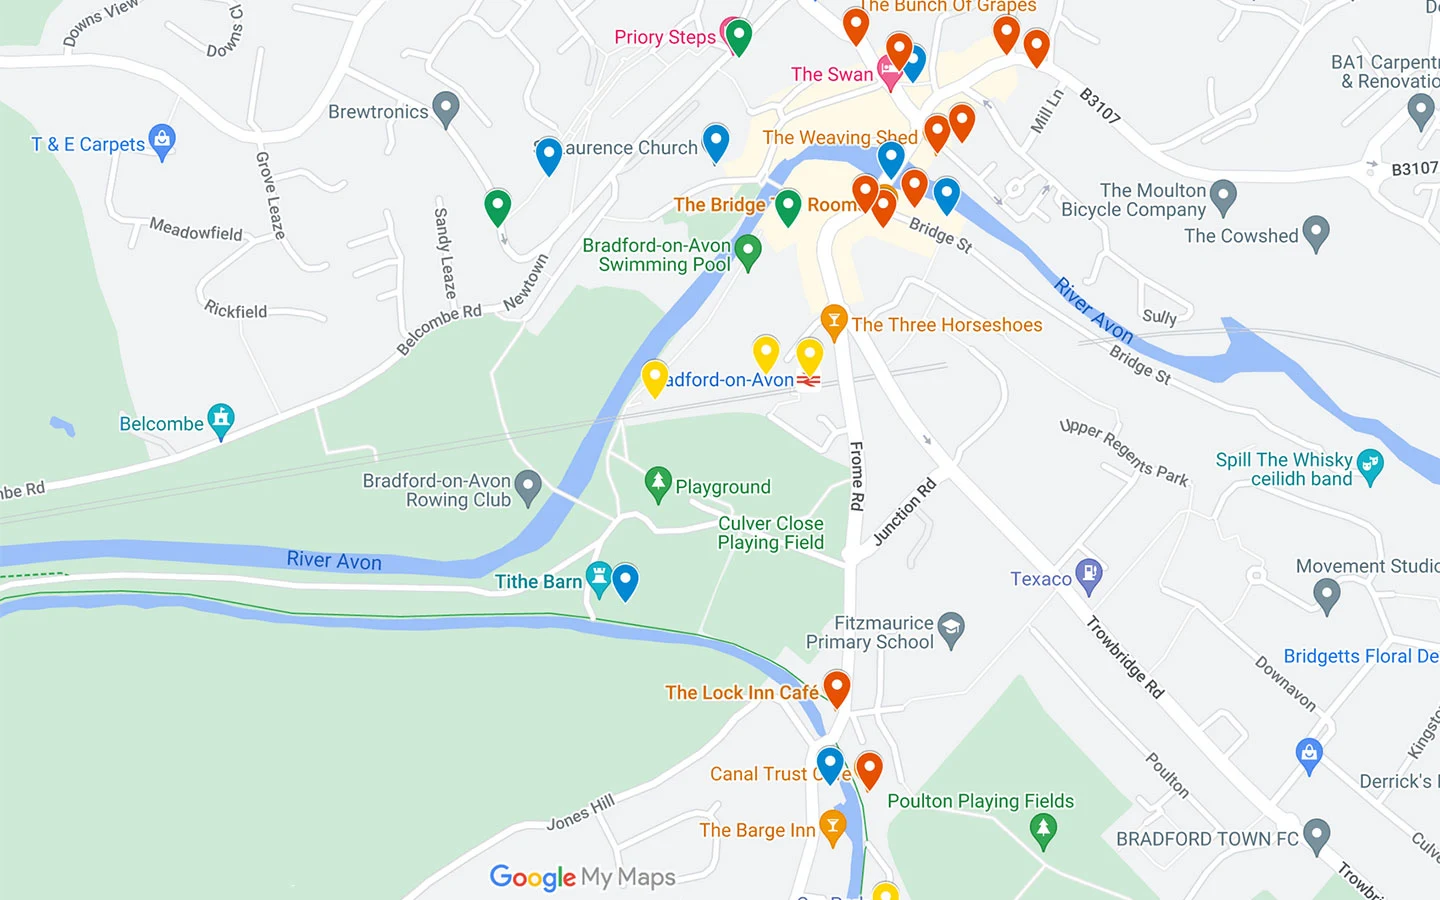 Map of things to do in Bradford on Avon